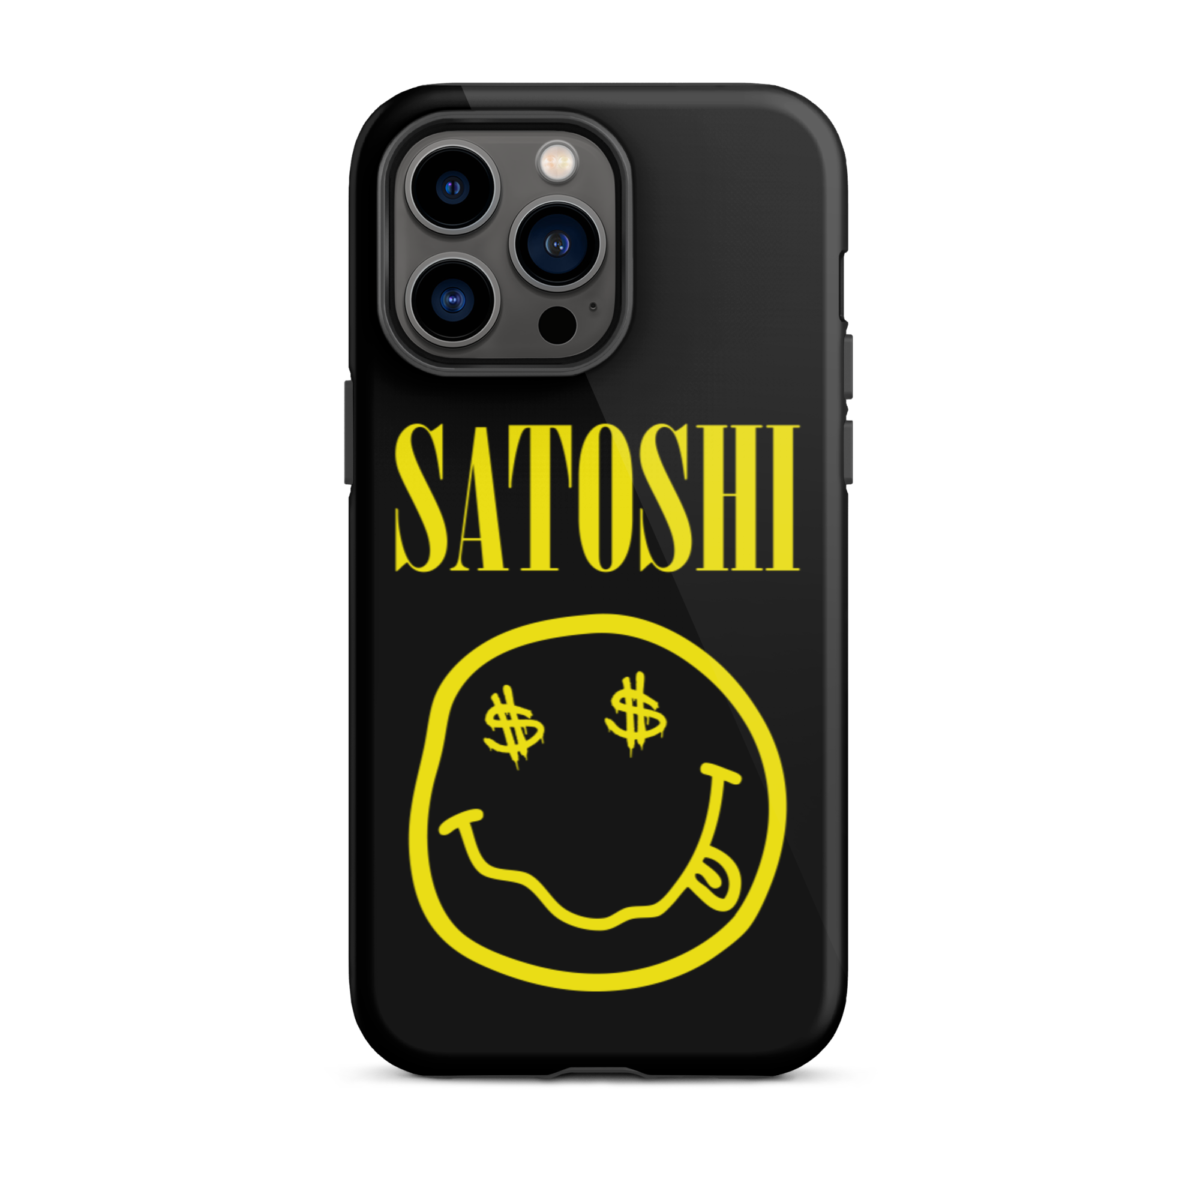 tough iphone case glossy iphone 14 pro max front 6397c1799d37b - Satoshi YLW Tough iPhone Case